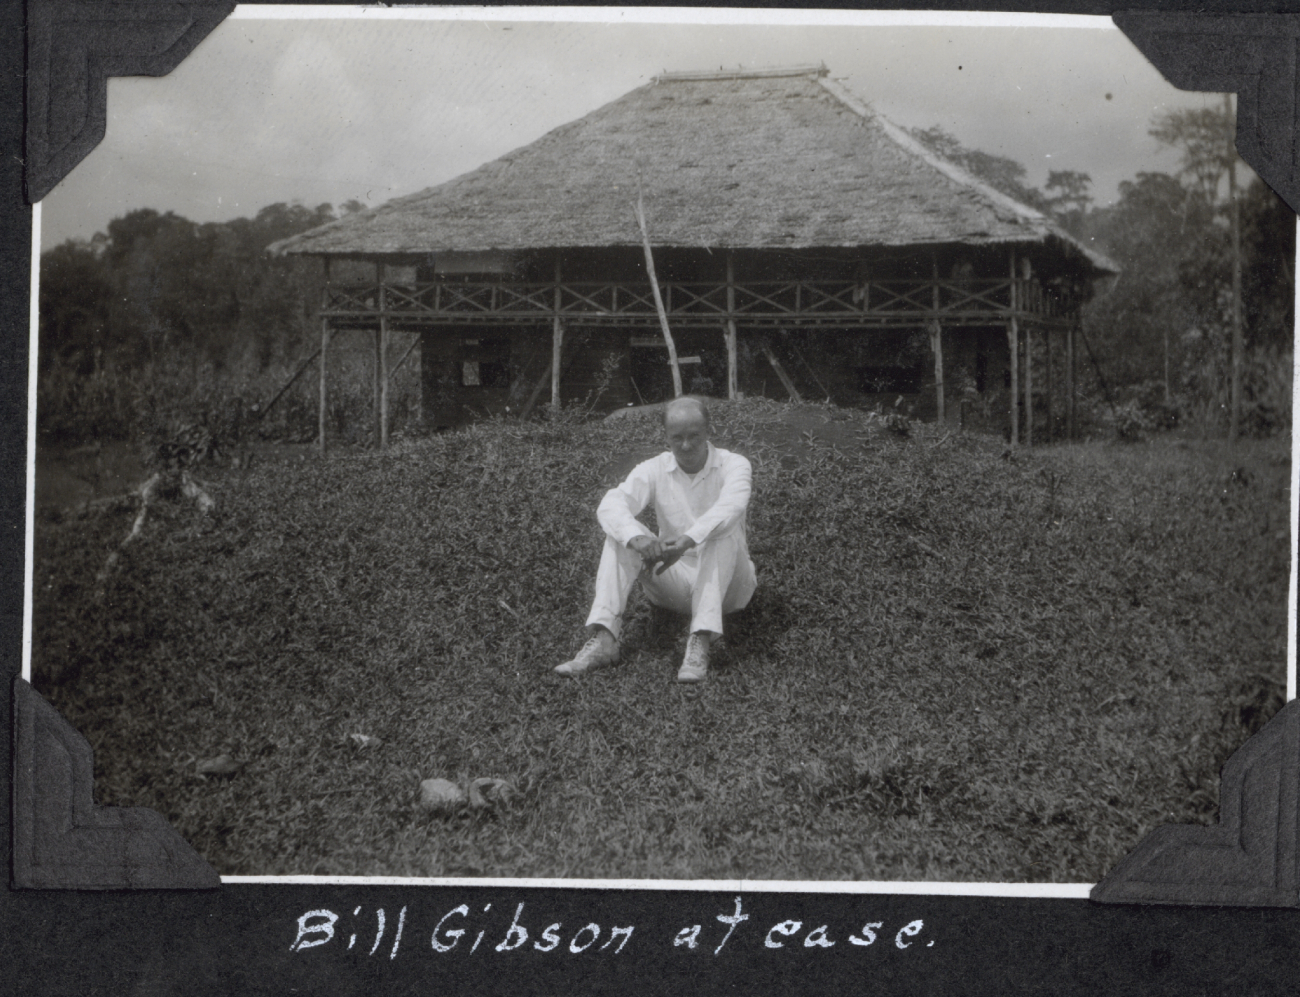 Lieutenant Bill Gibson (1901-1984) in the Philippines